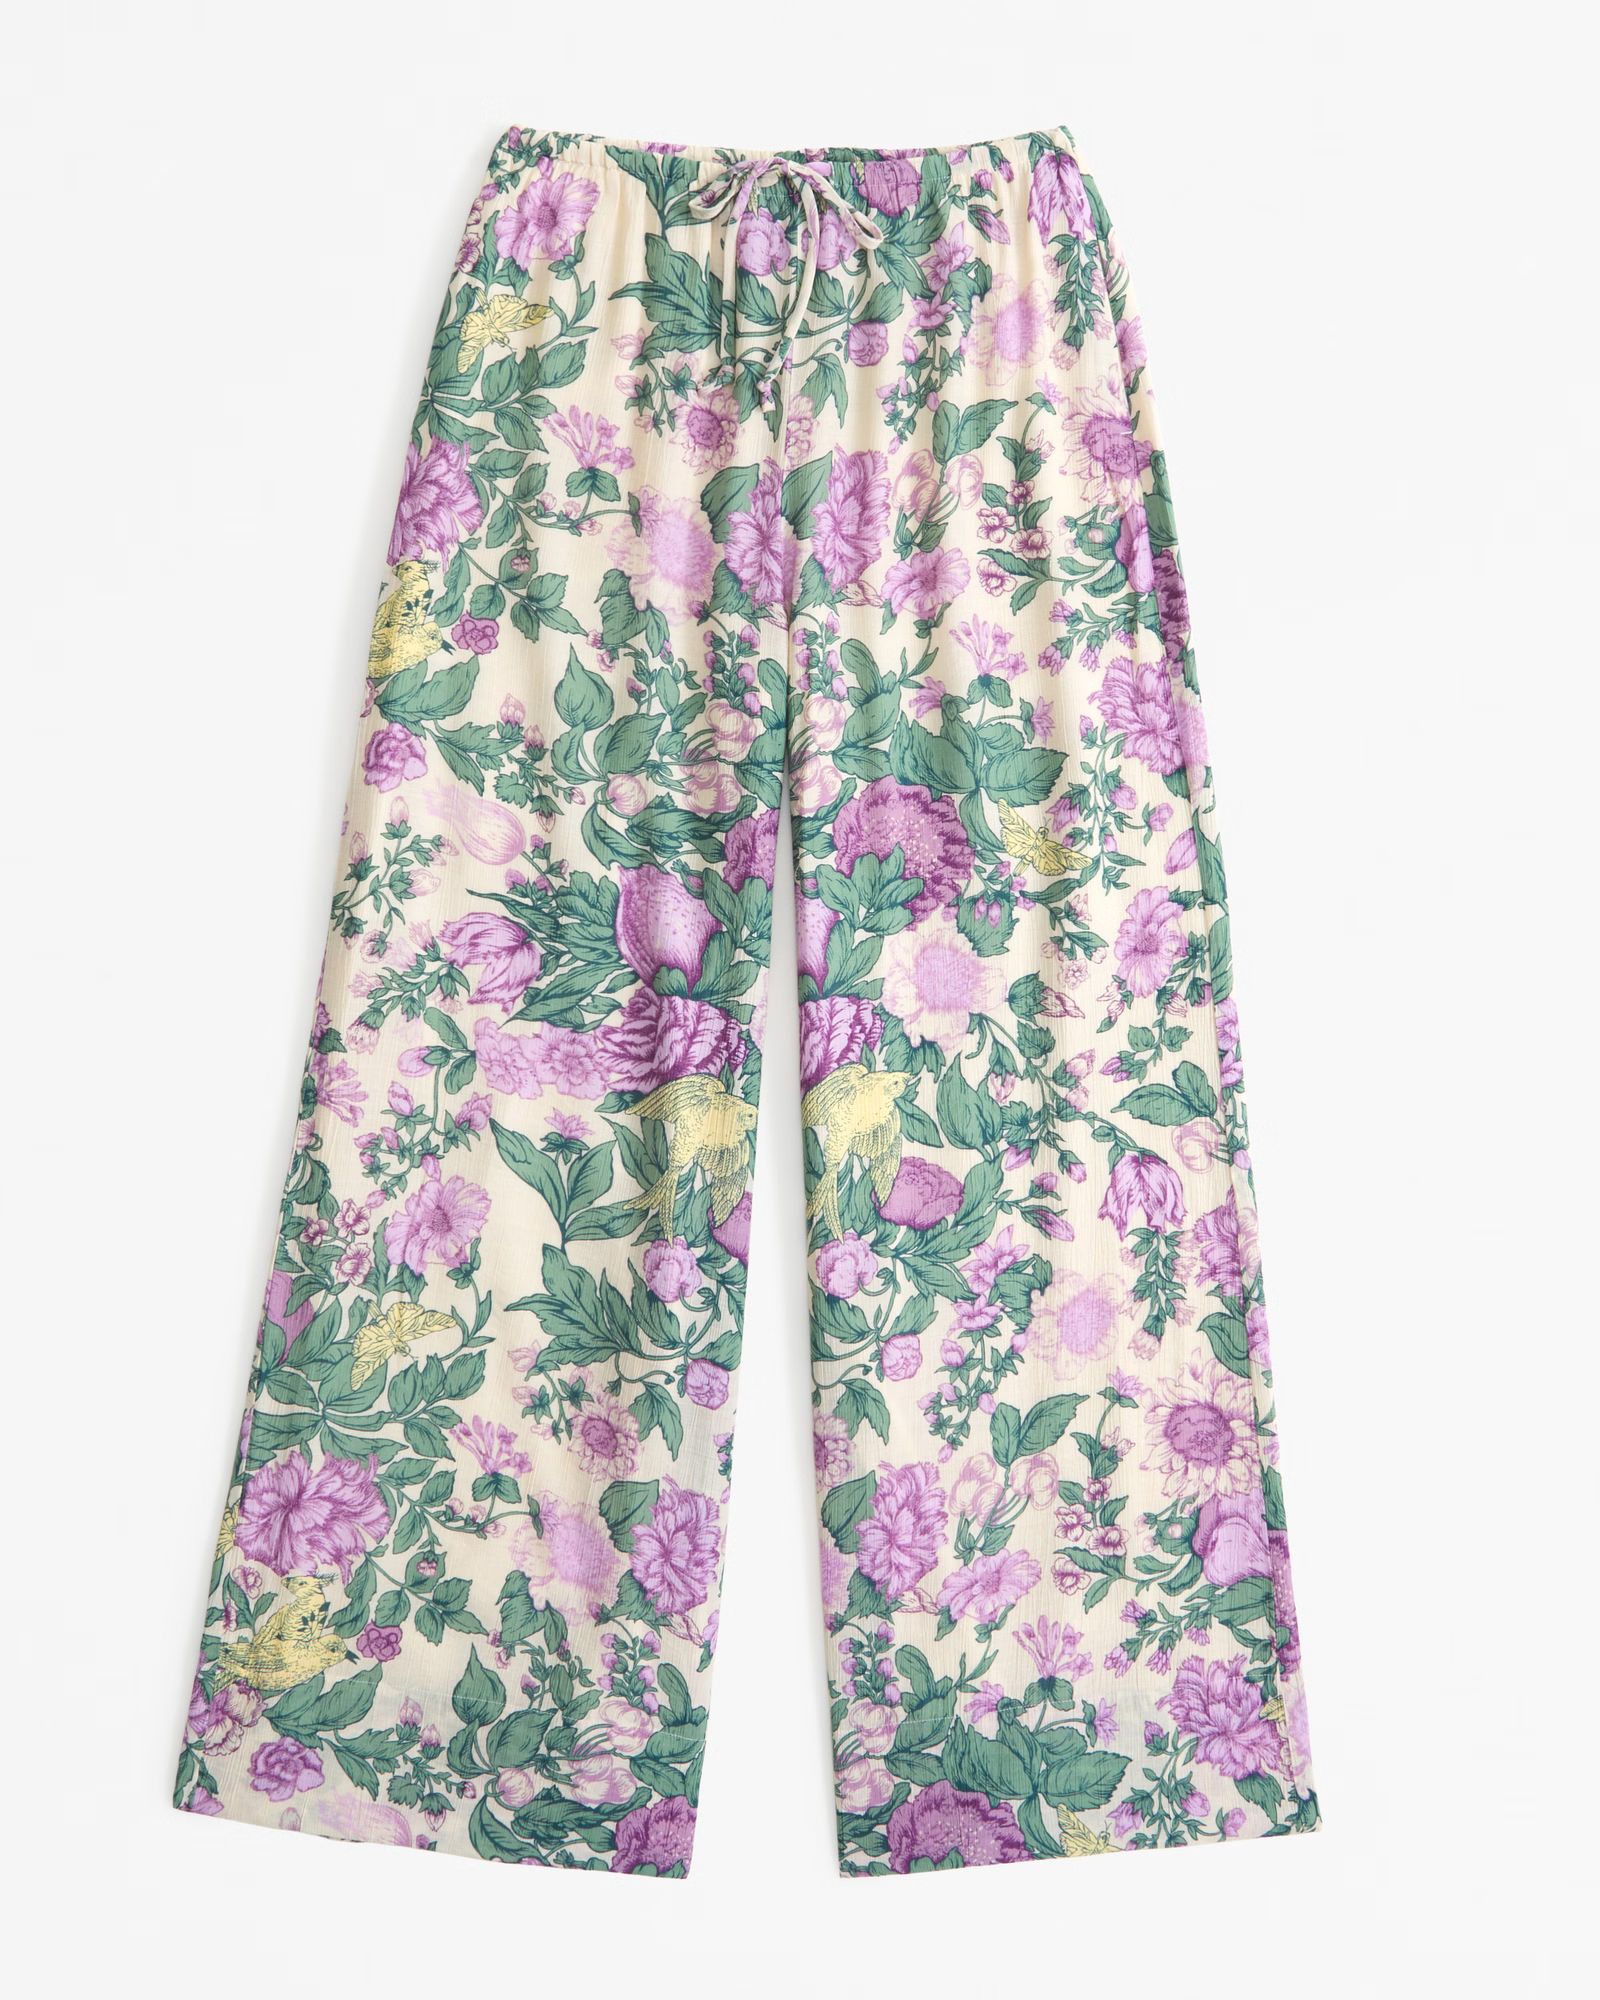 Women's Crinkle Textured Pull-On Palazzo Pant | Women's New Arrivals | Abercrombie.com | Abercrombie & Fitch (US)